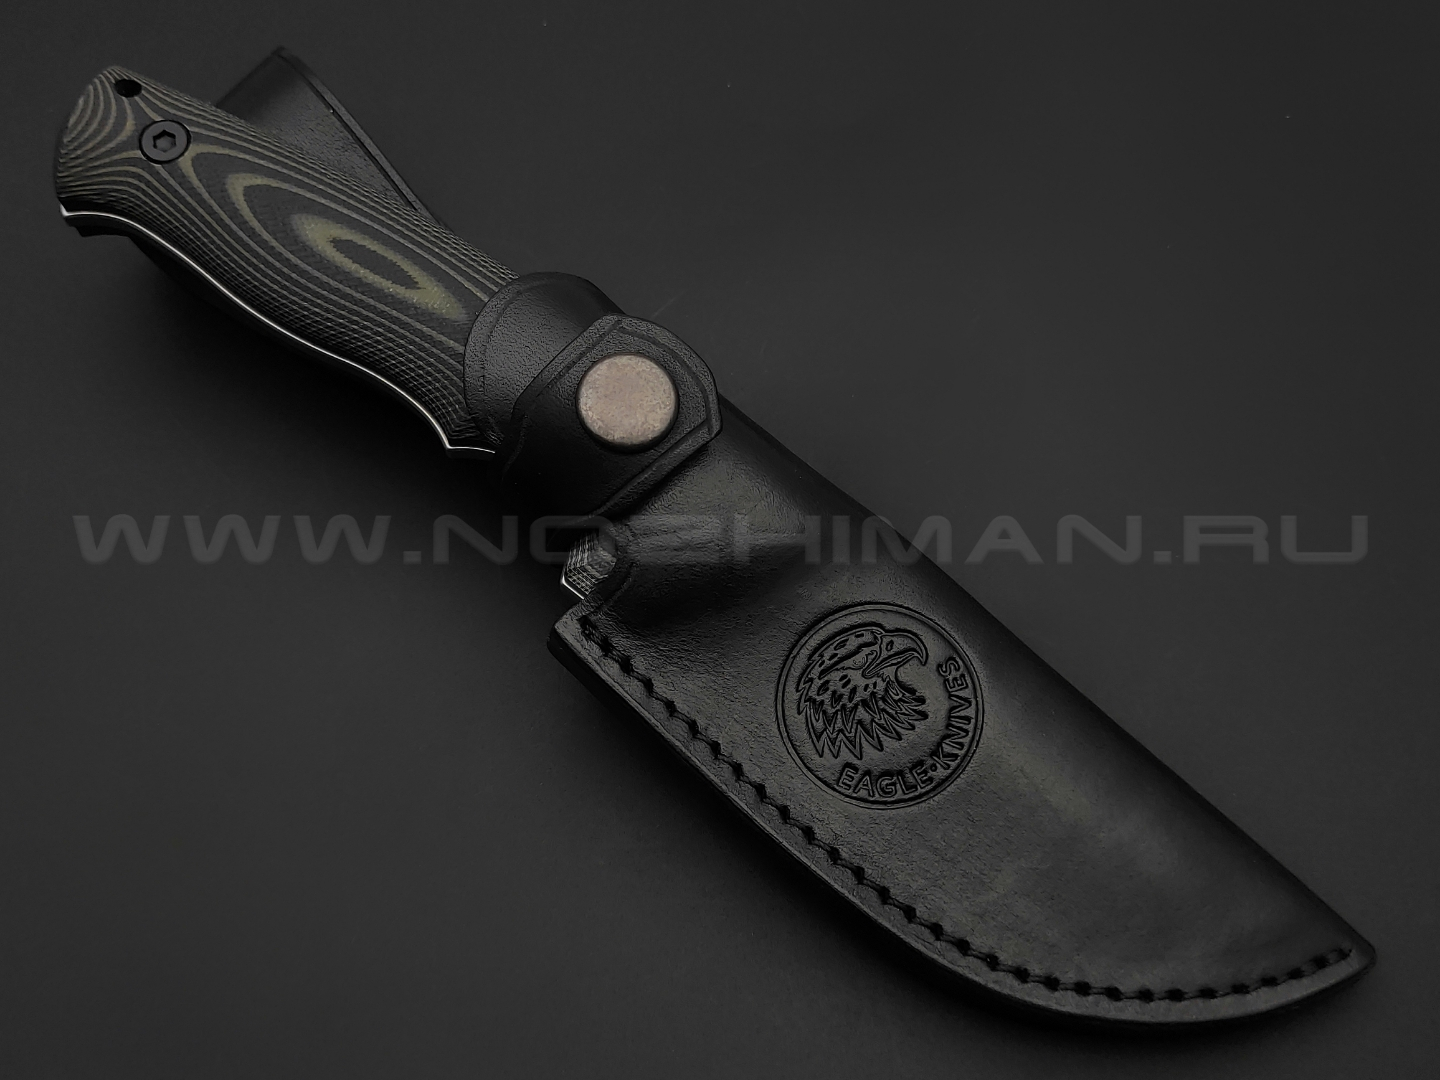 Eagle Knives нож Forester 1 сталь Aus10Co stonewash, рукоять G10 black & green